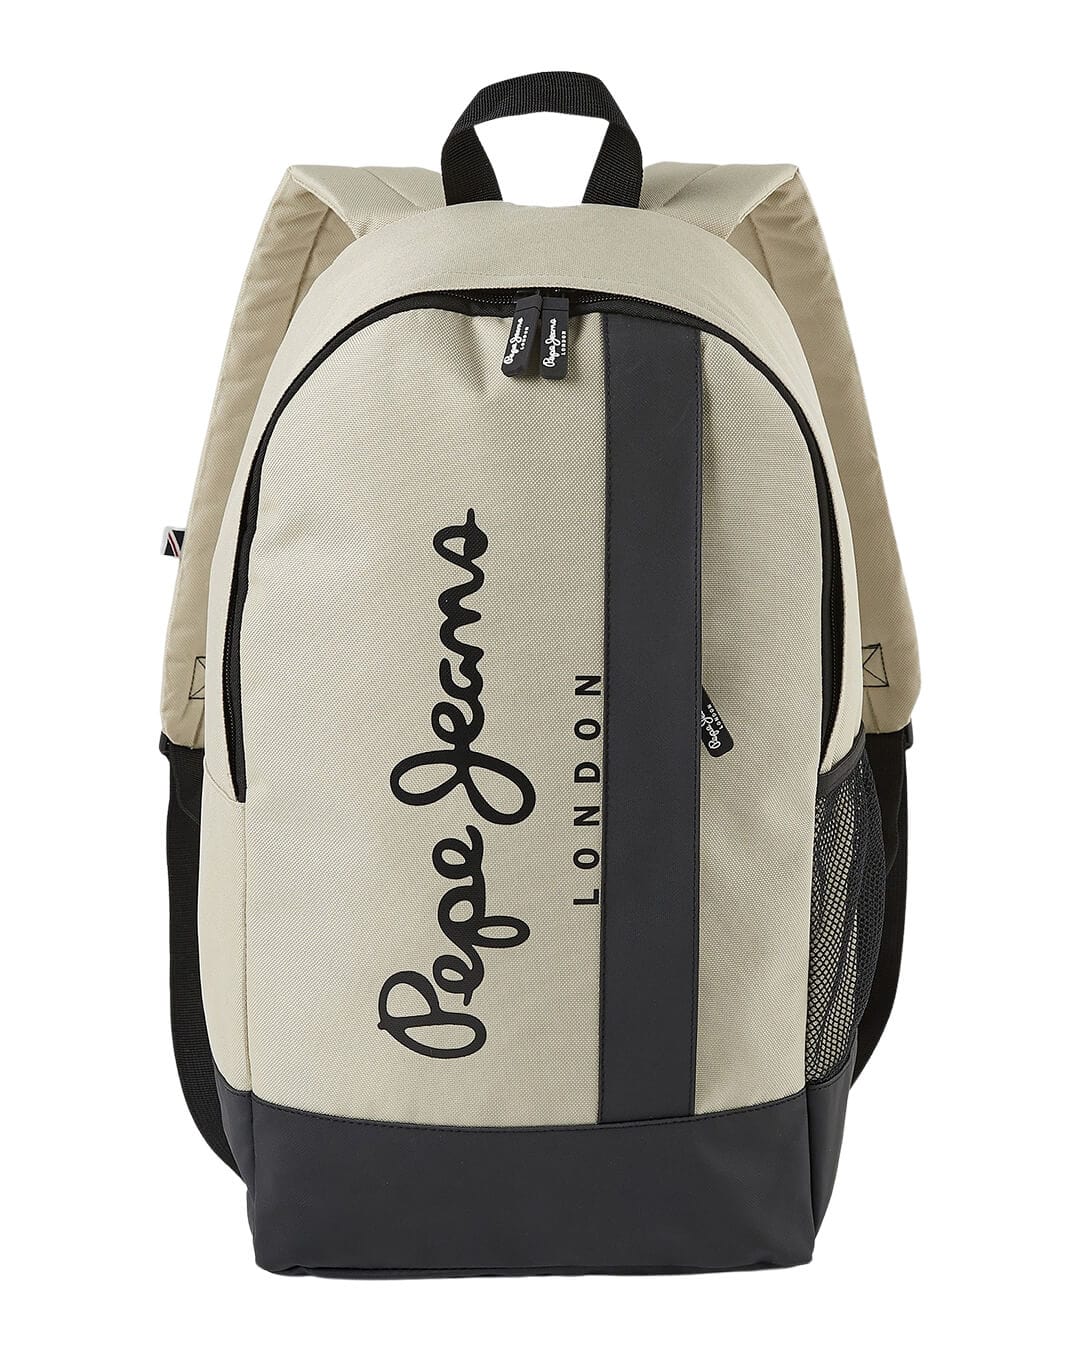 Pepe Jeans Bags ONE SIZE Pepe Jeans Owen Street Style Beige Backpack